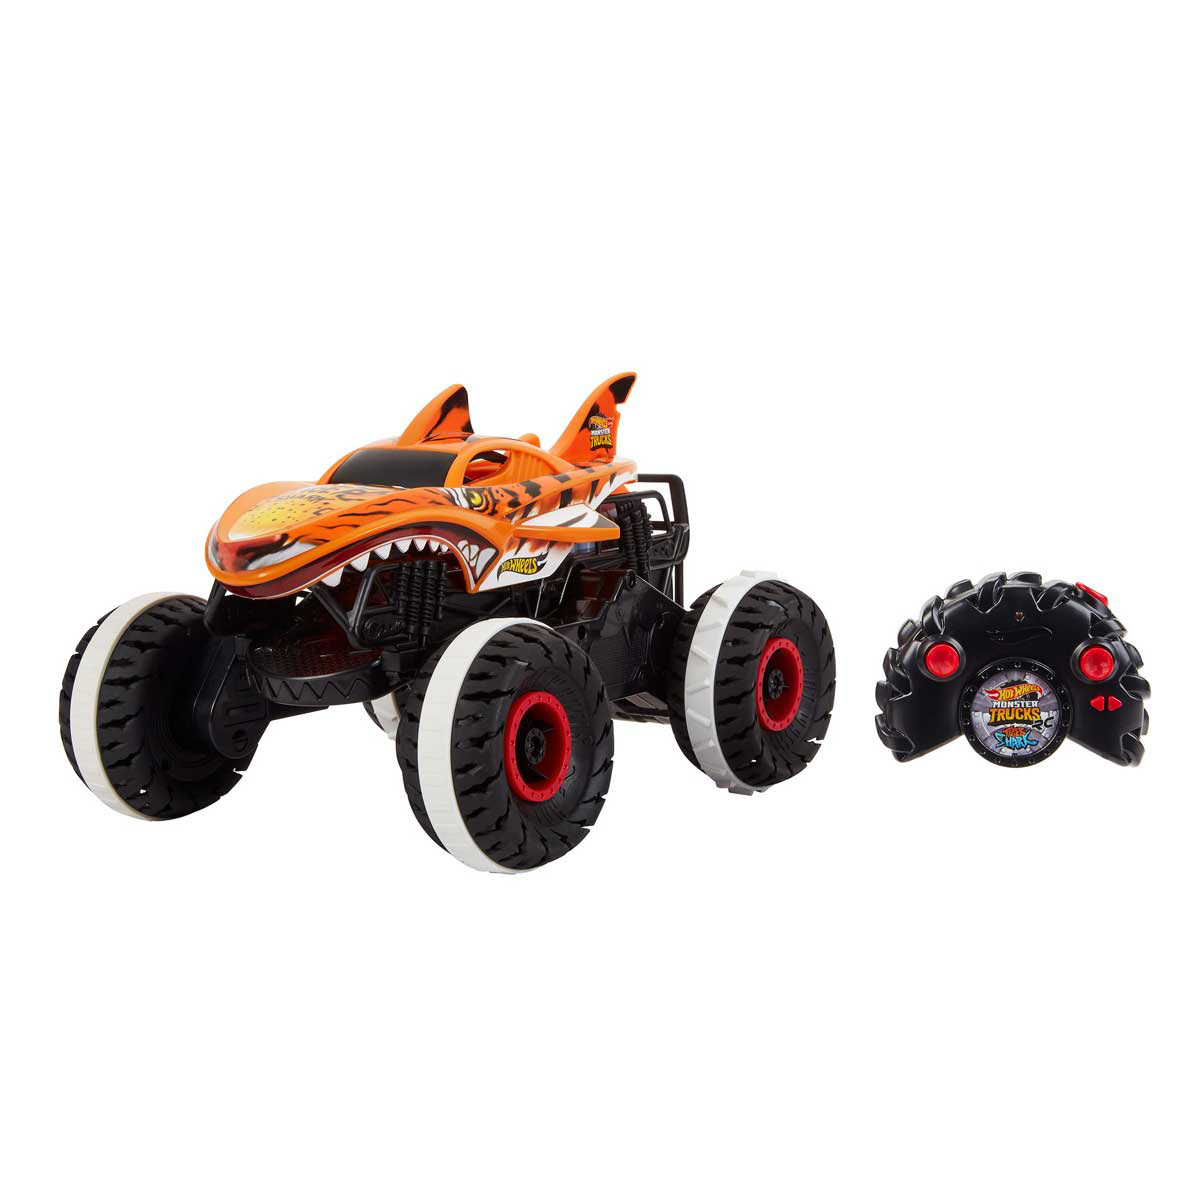 Check Out the All-New Spider-Man Monster Jam Truck